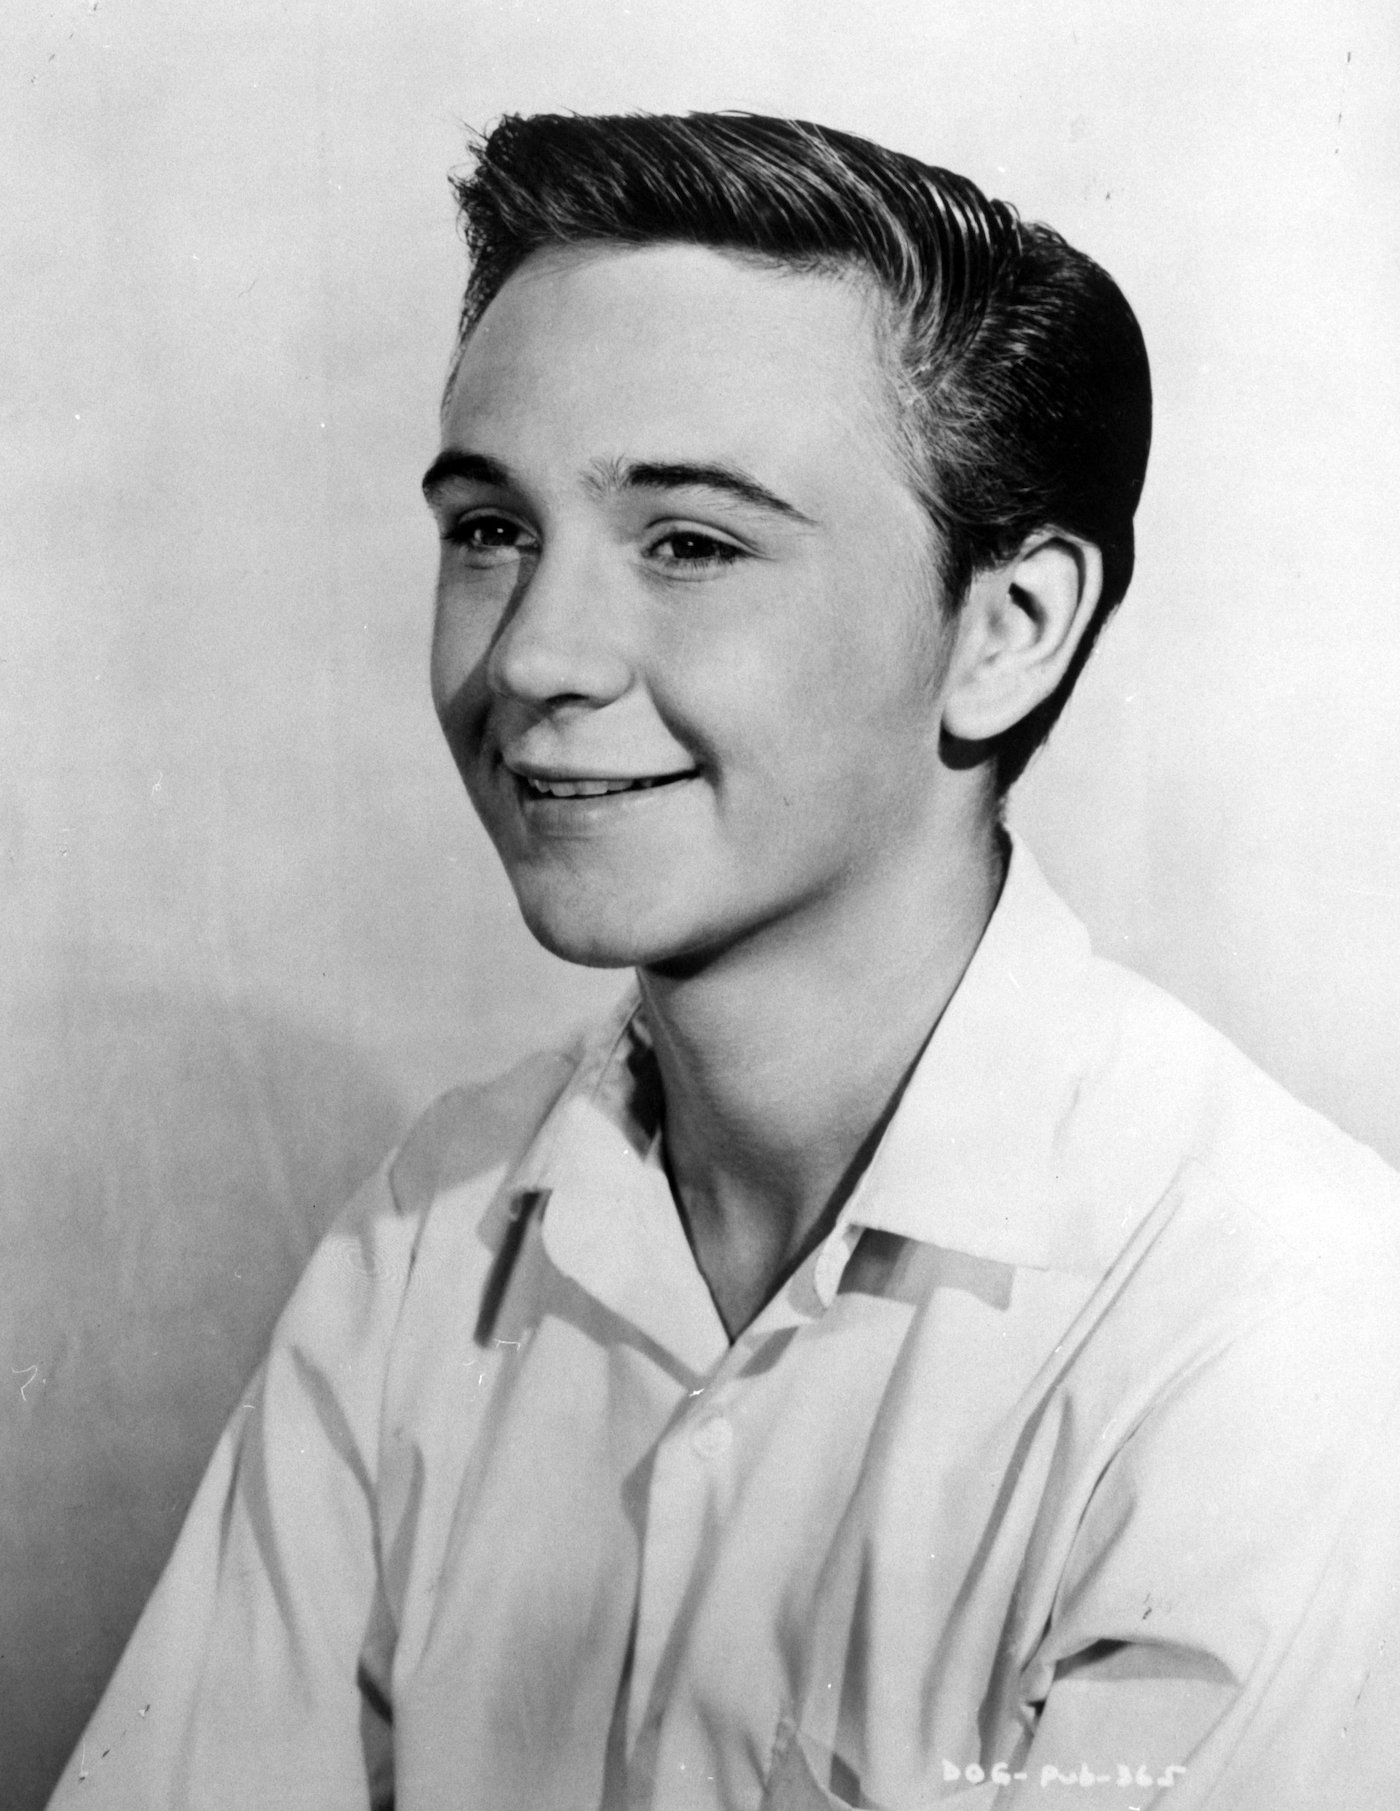 Tommy Kirk in the 1960s